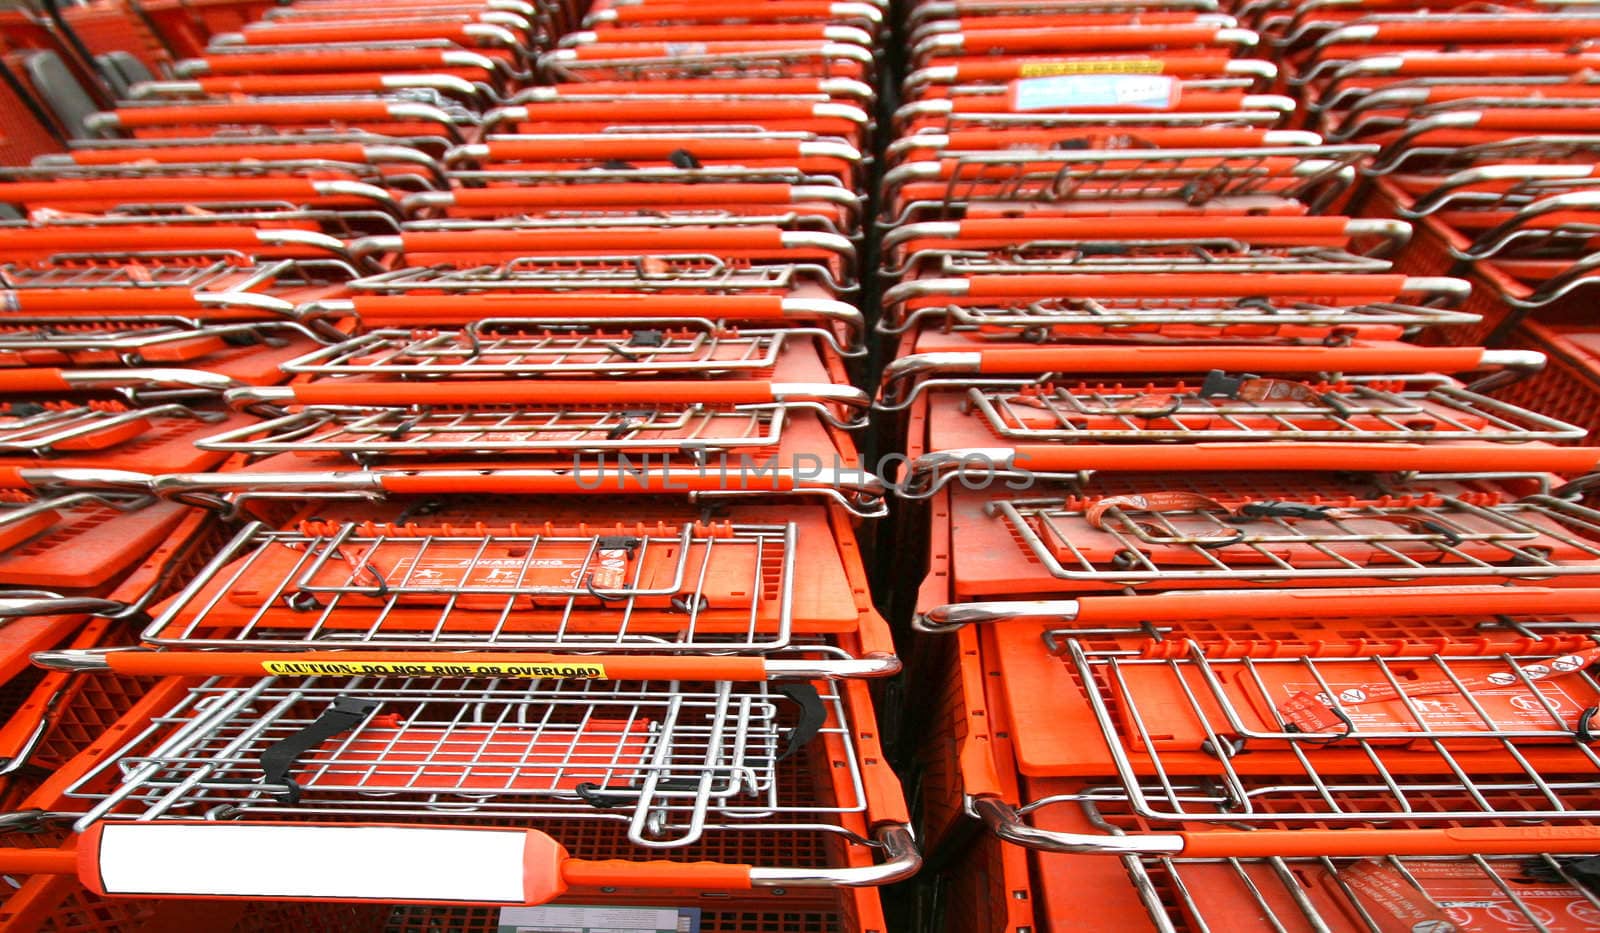 Endless lines of carts by Imagecom